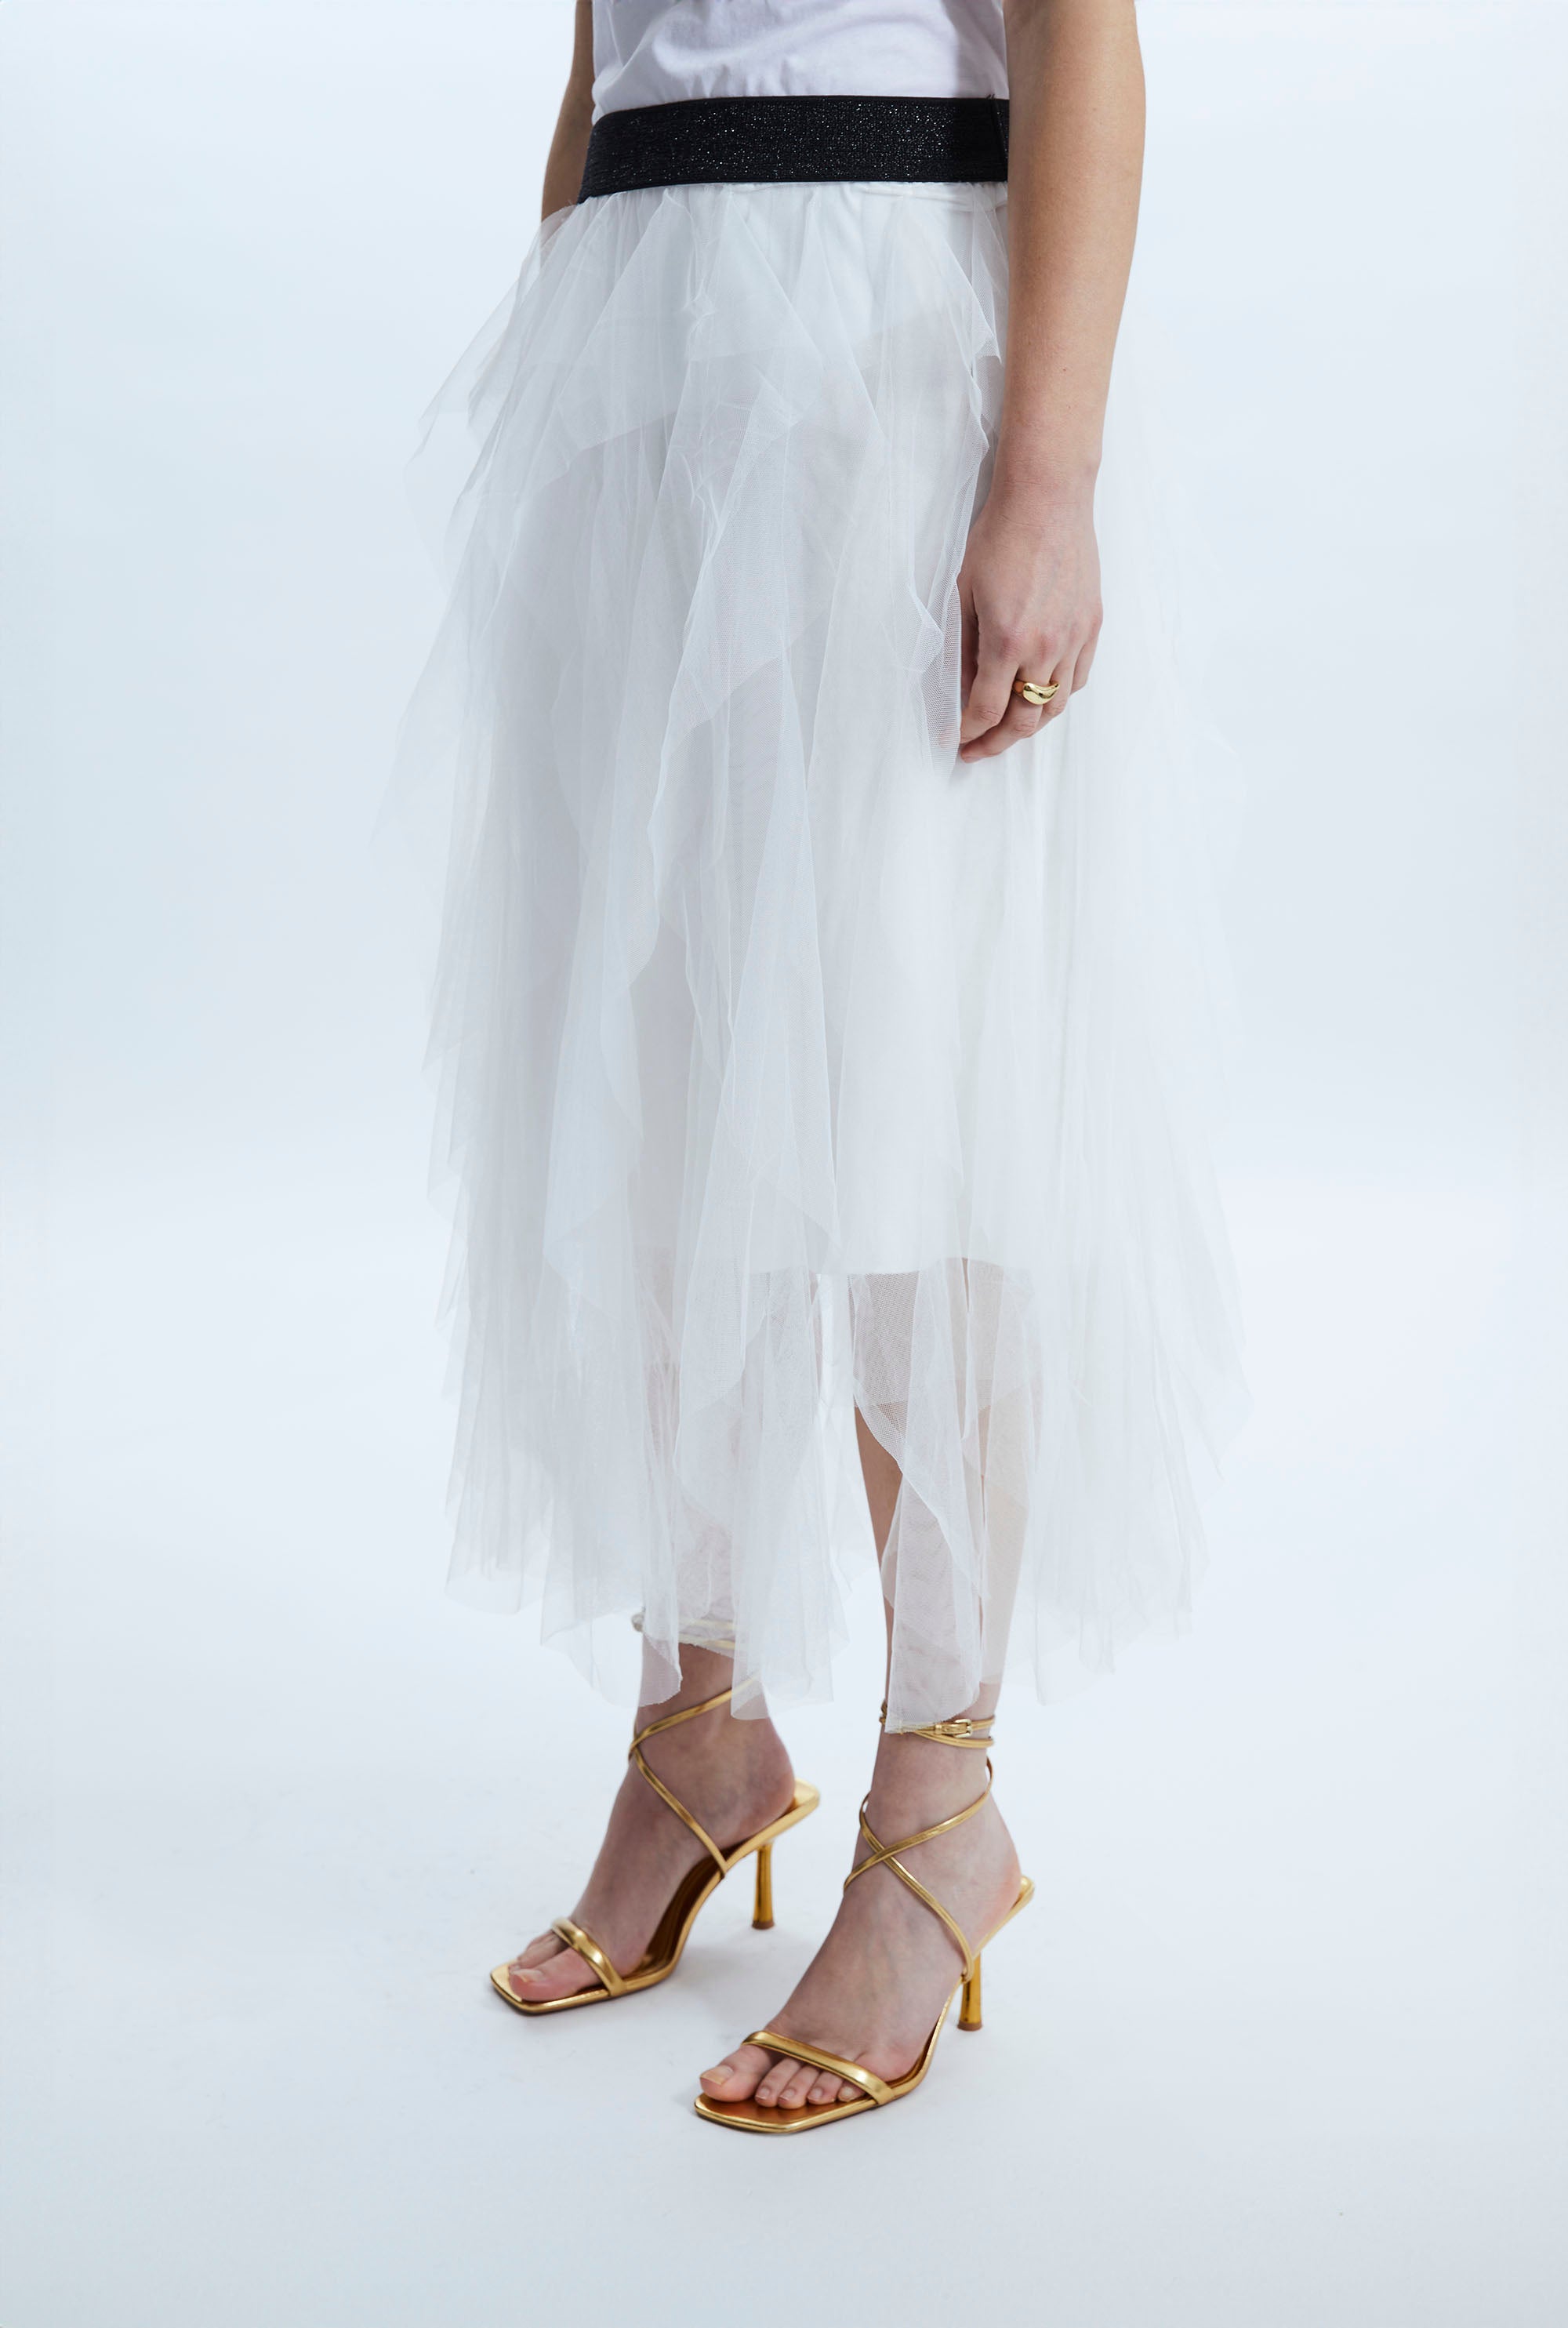 White Organza Tiered Carrie Skirt